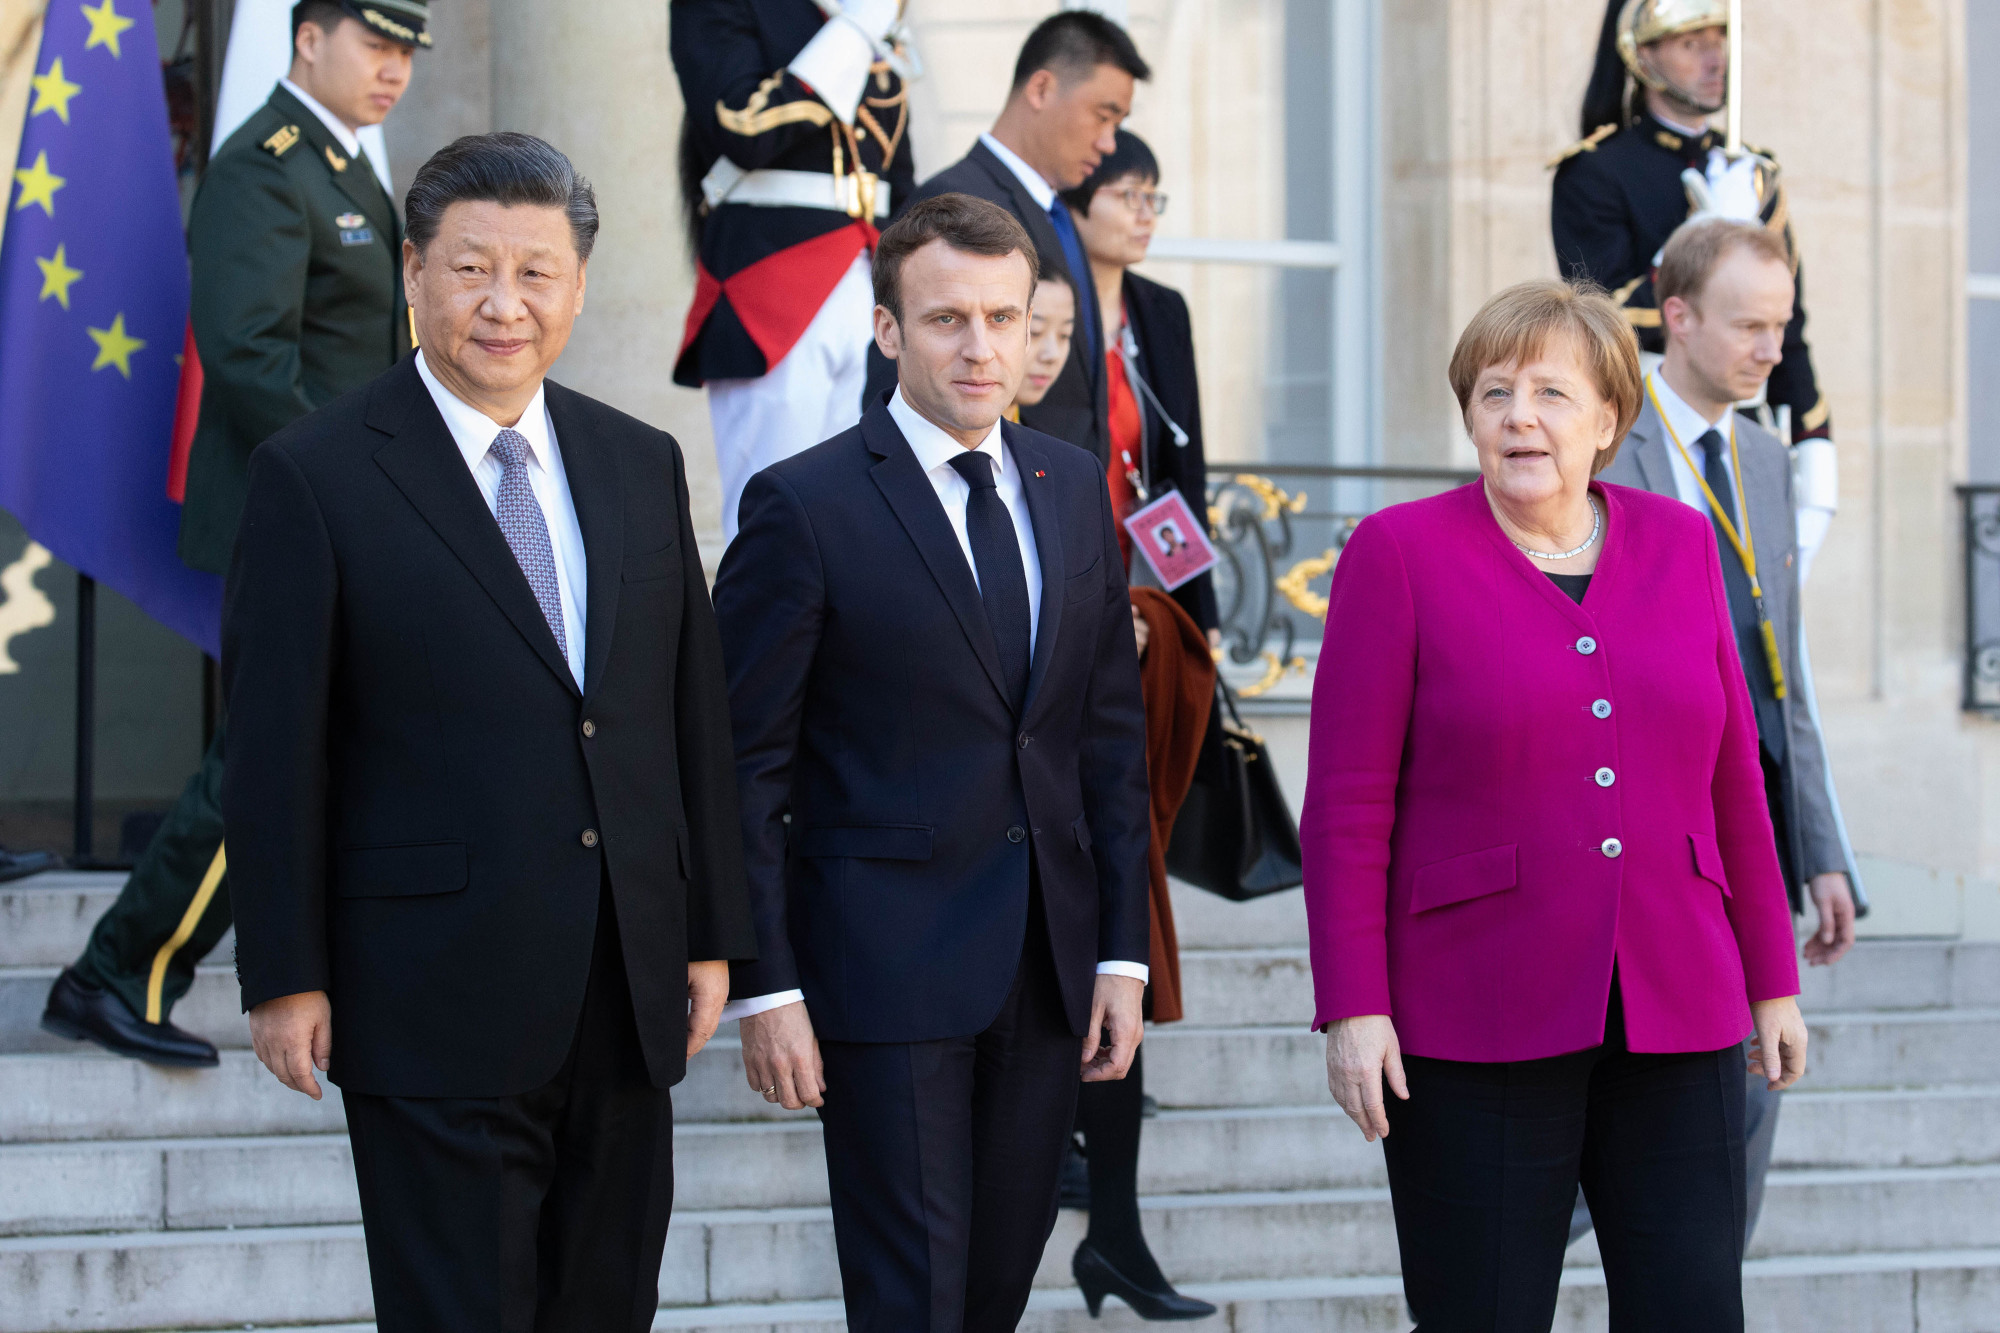 Chinese President Xi Jinping poses for the press with his French and German counterparts Emmanuel Macron and Angela Merkel at Elysee Palace in Paris on March 26. | BLOOMBERG